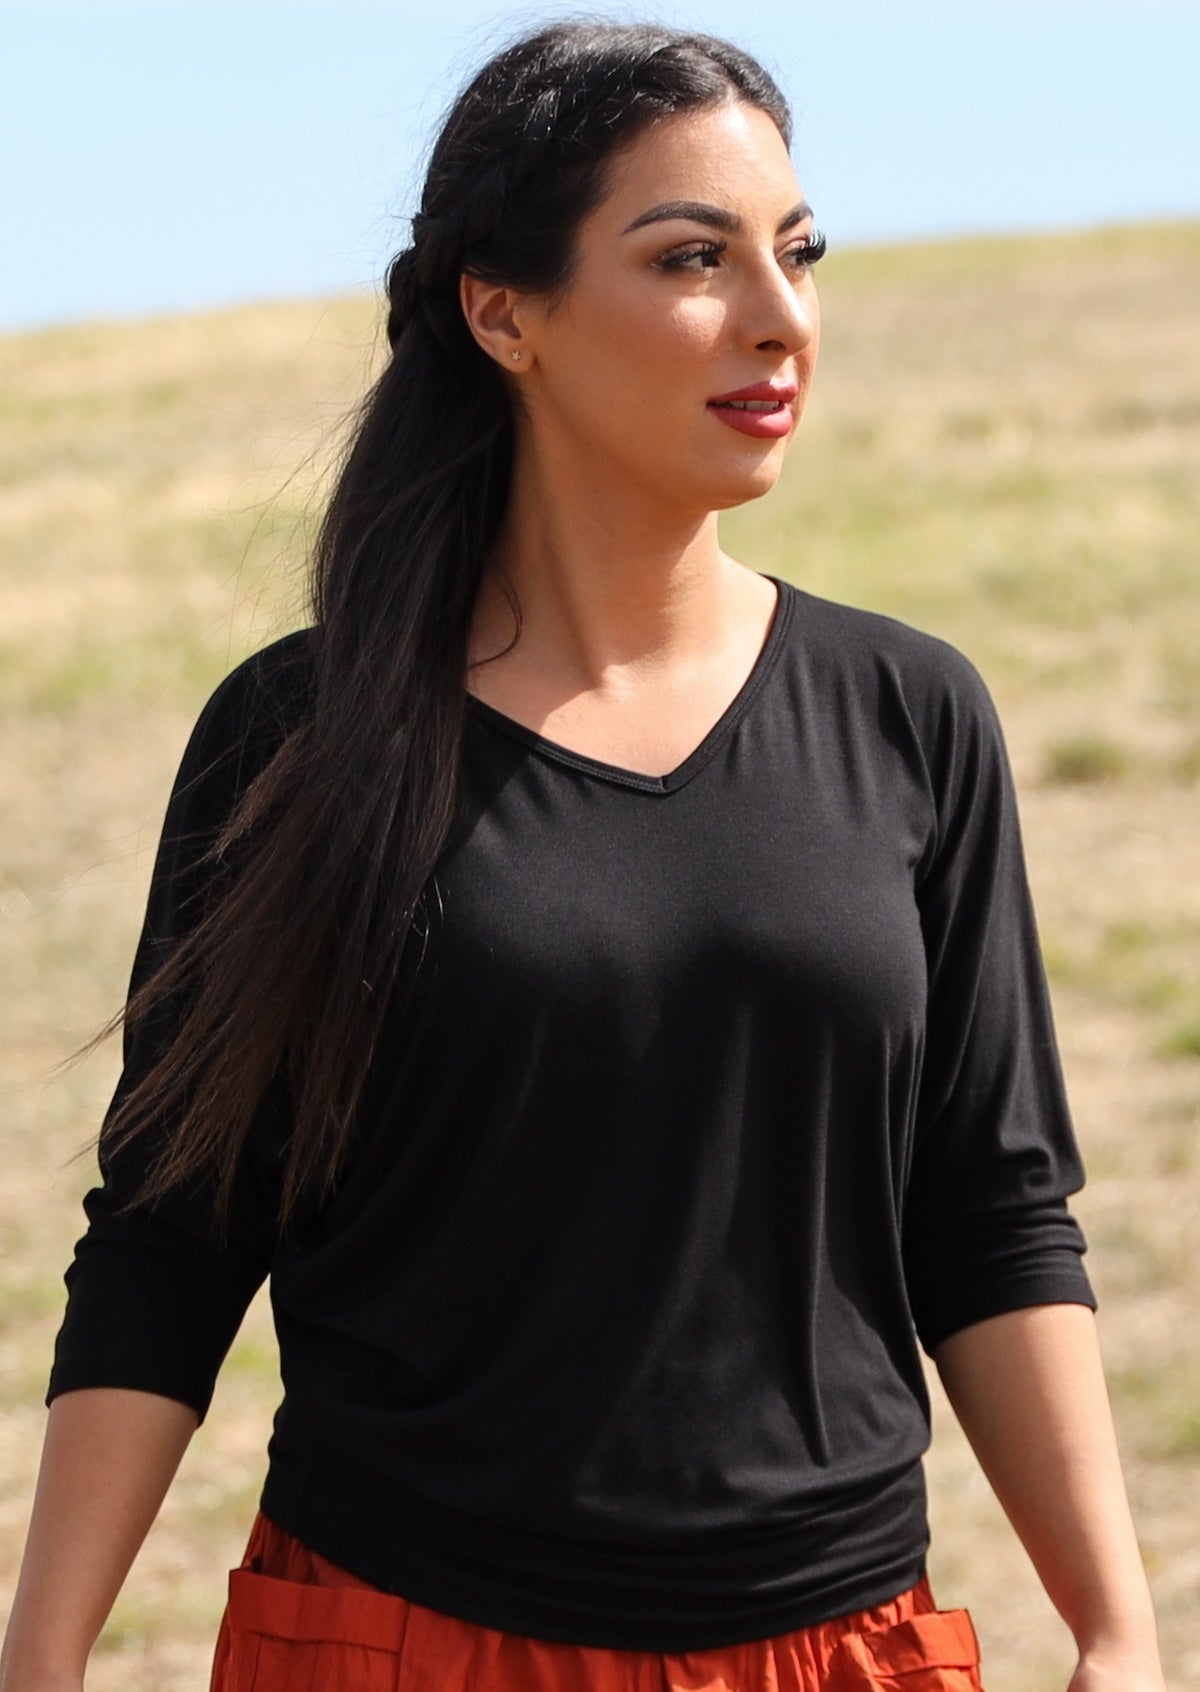 Woman wearing a 3/4 sleeve rayon batwing v-neck black top.